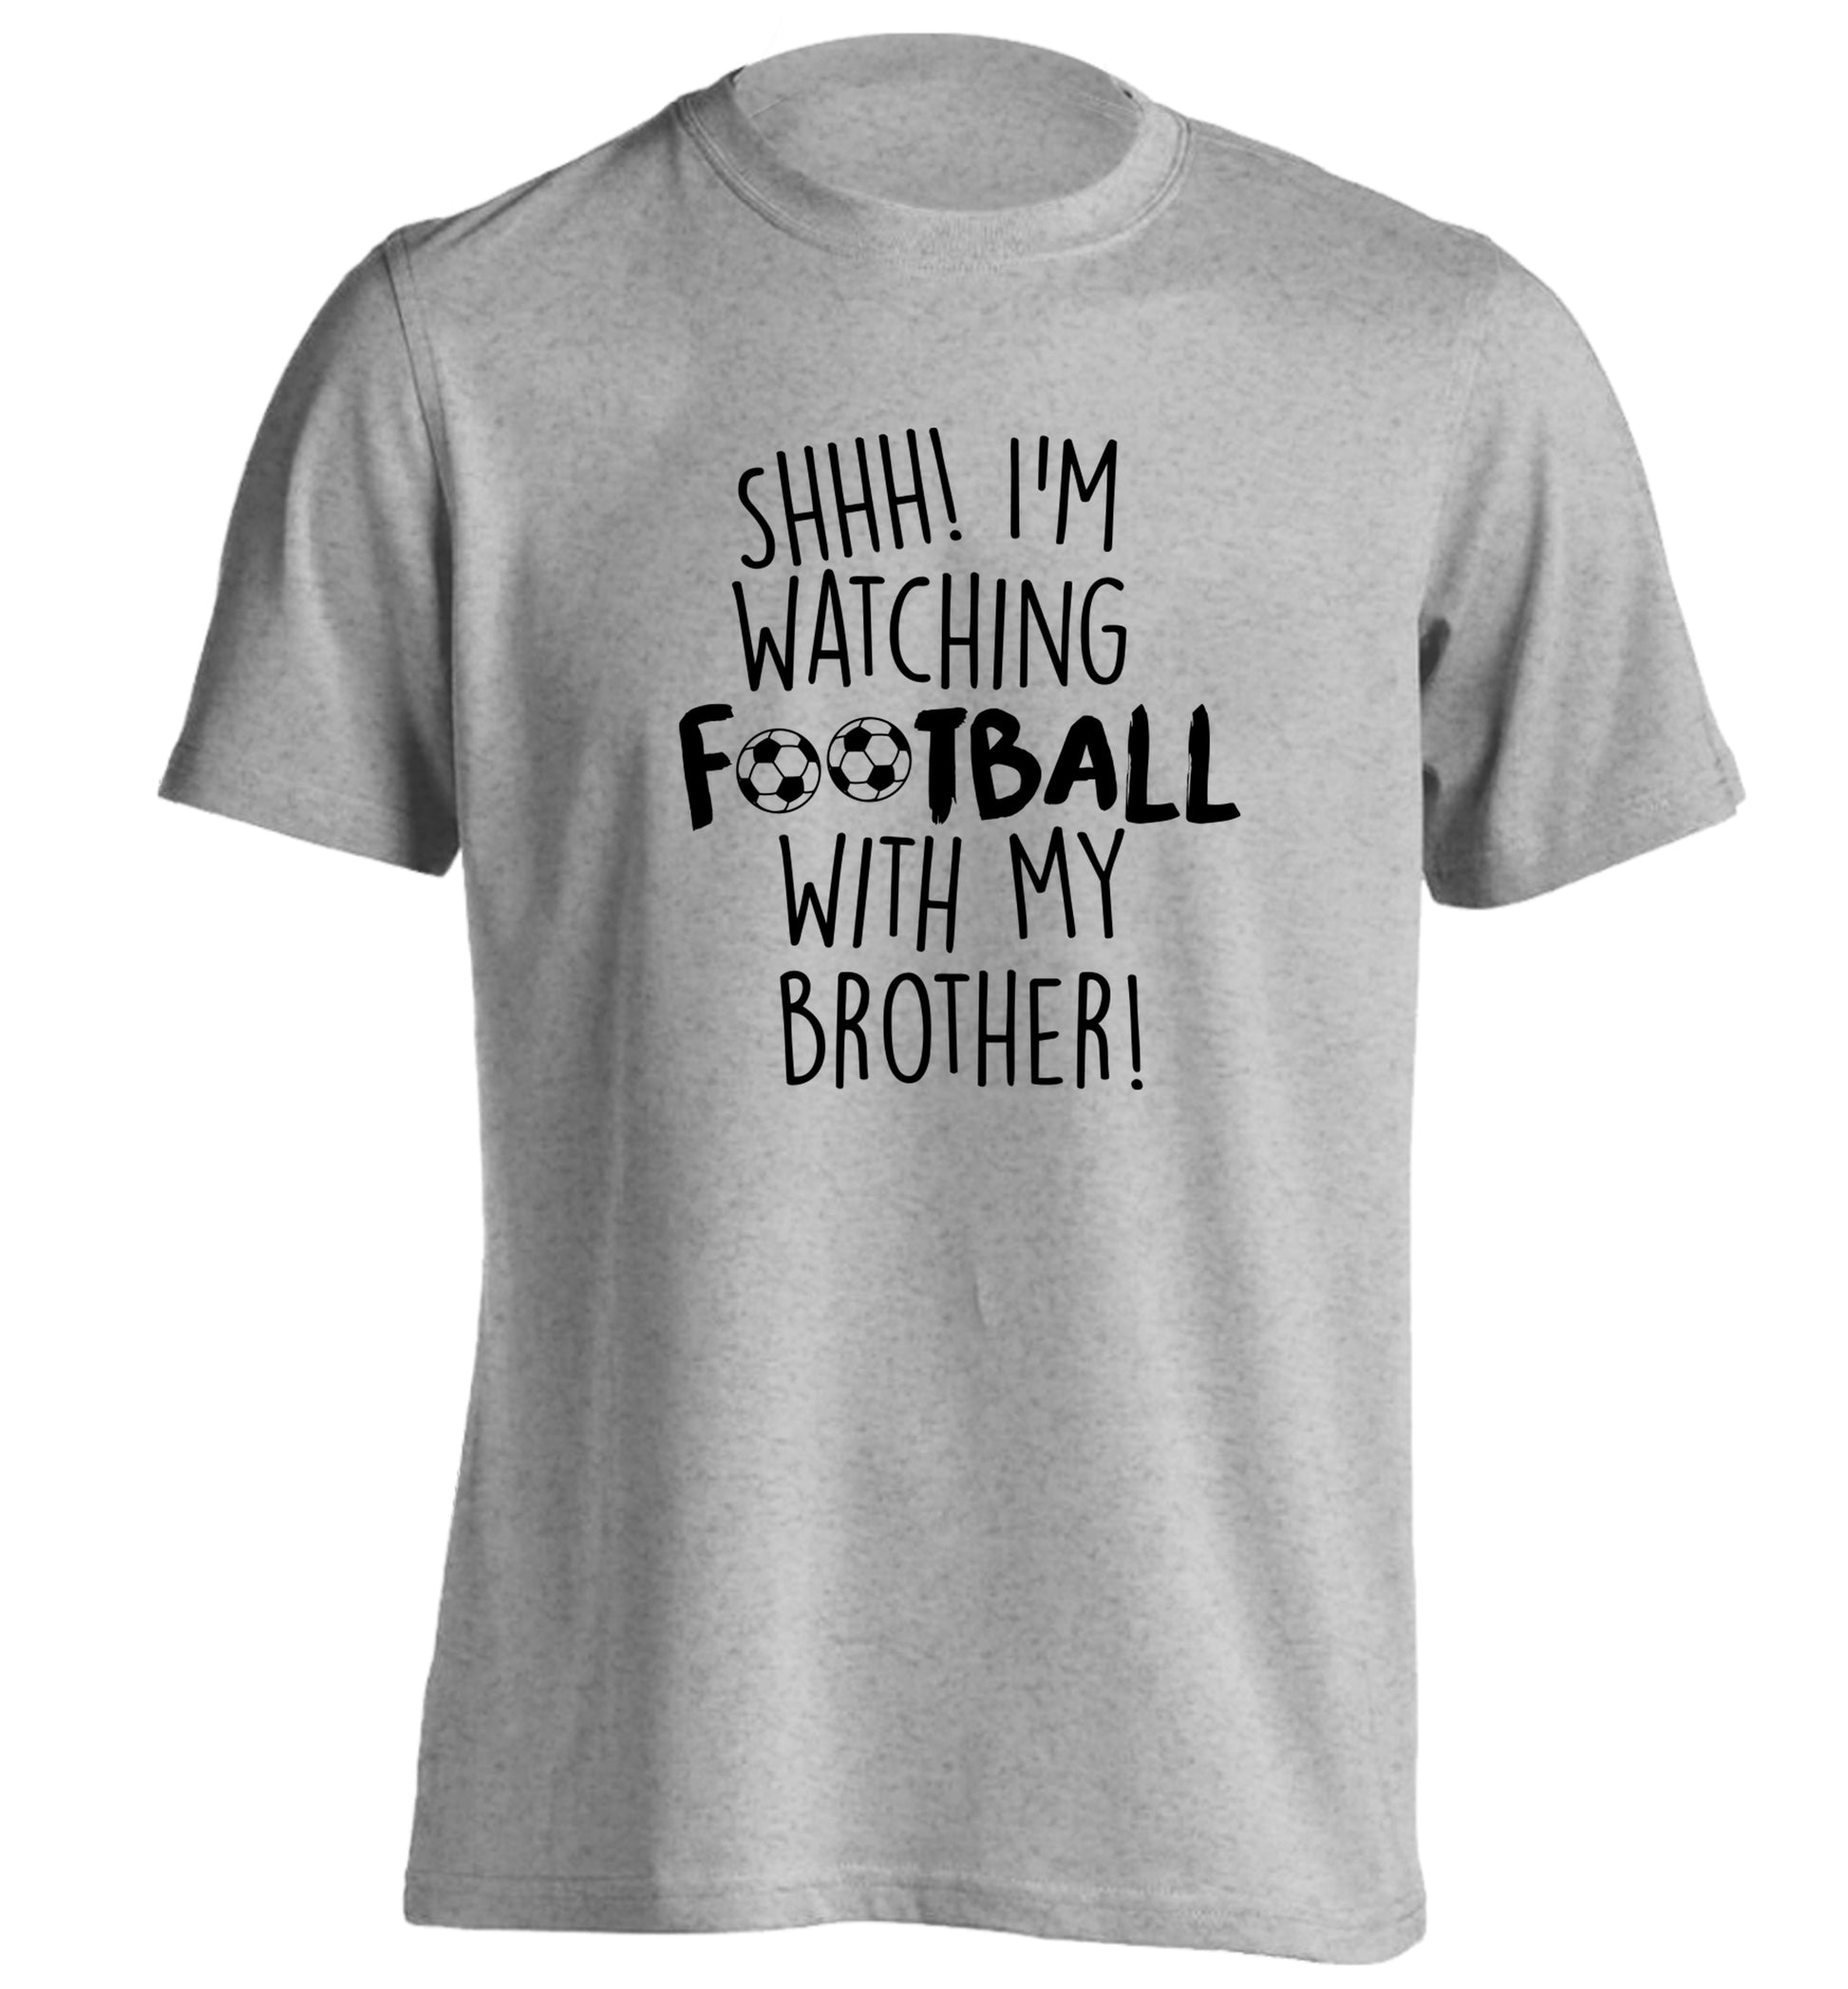 Shhh I'm watching football with my brother adults unisexgrey Tshirt 2XL